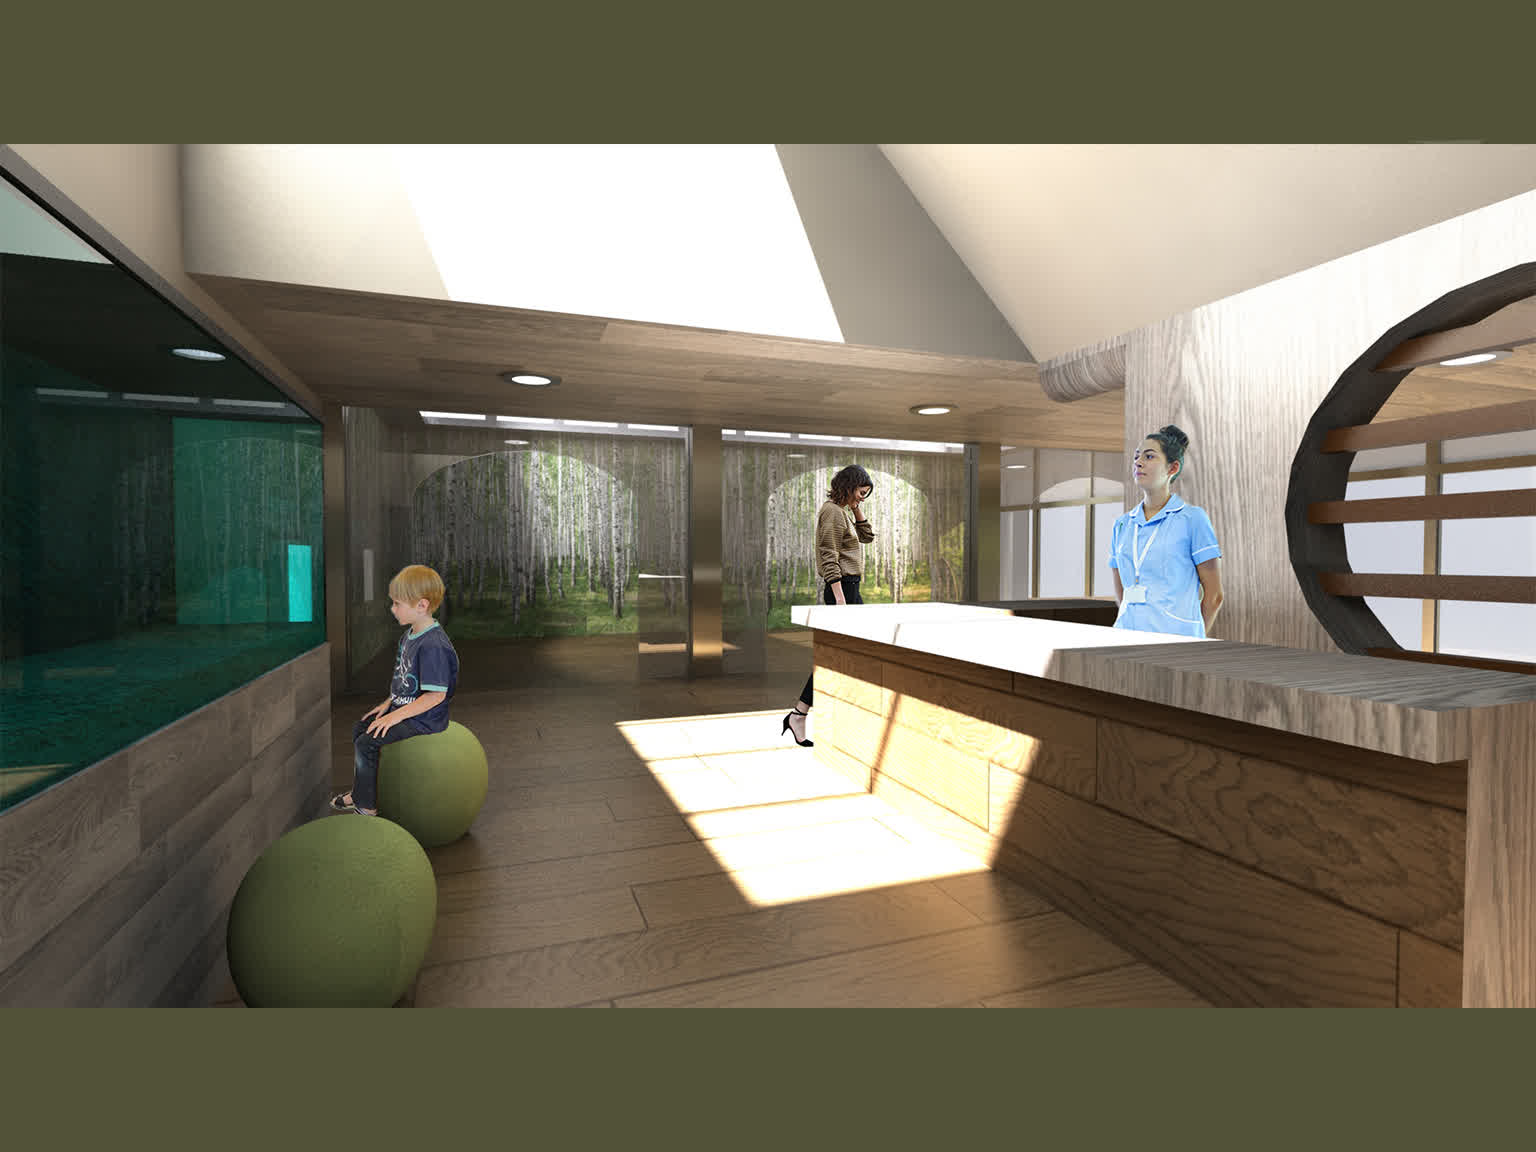 View of the hospital scene, from the hospital corridor looking into the room. A fish tank and skylight create a nice atmosphere for both staff and patients